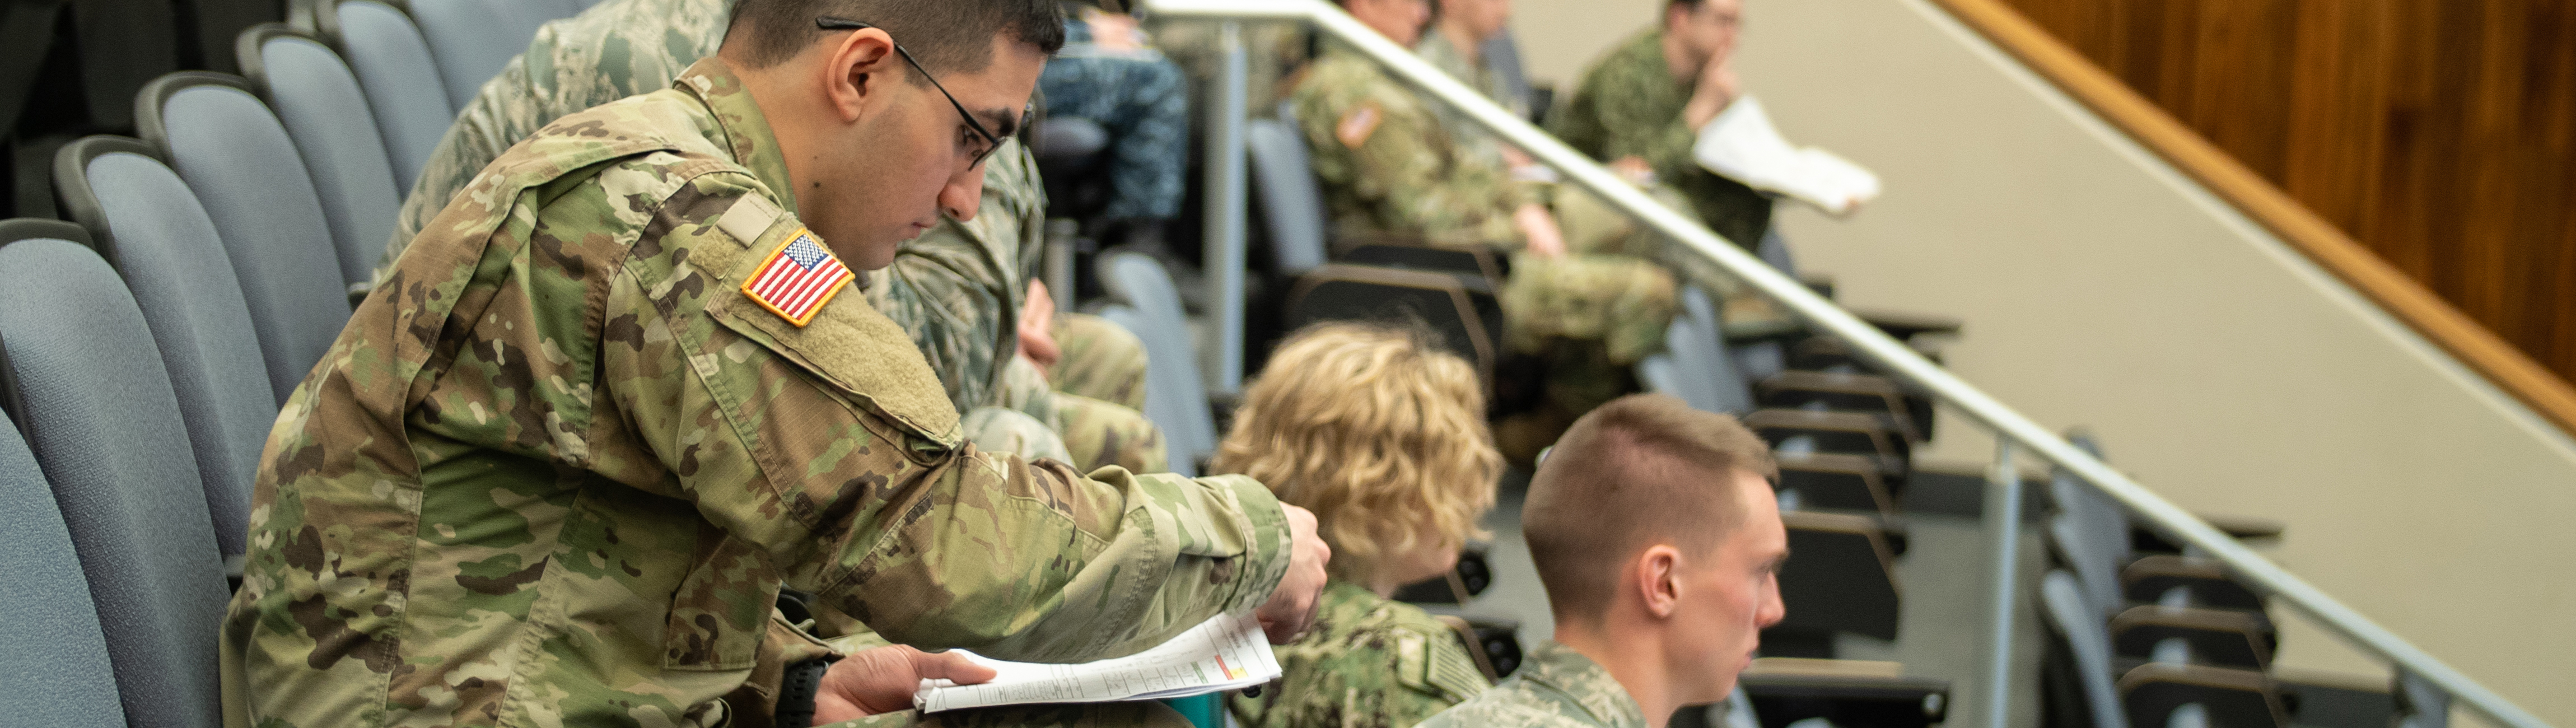 military students in lecture hall